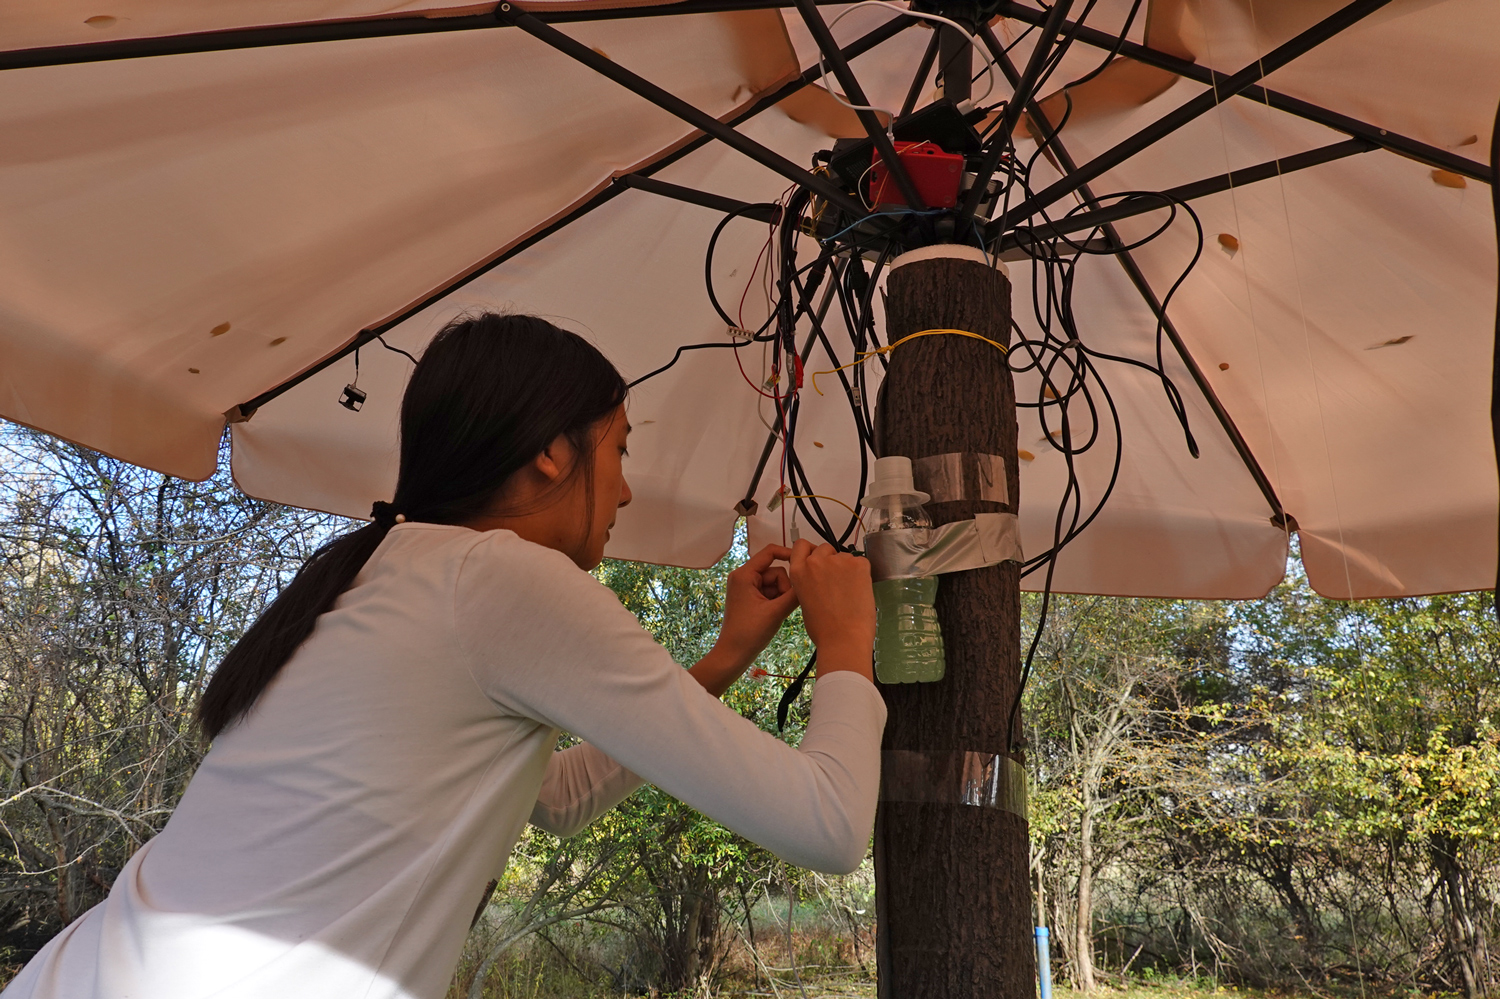 A teen connects wires to an umbrella base that has been wrapped in mesh wire.